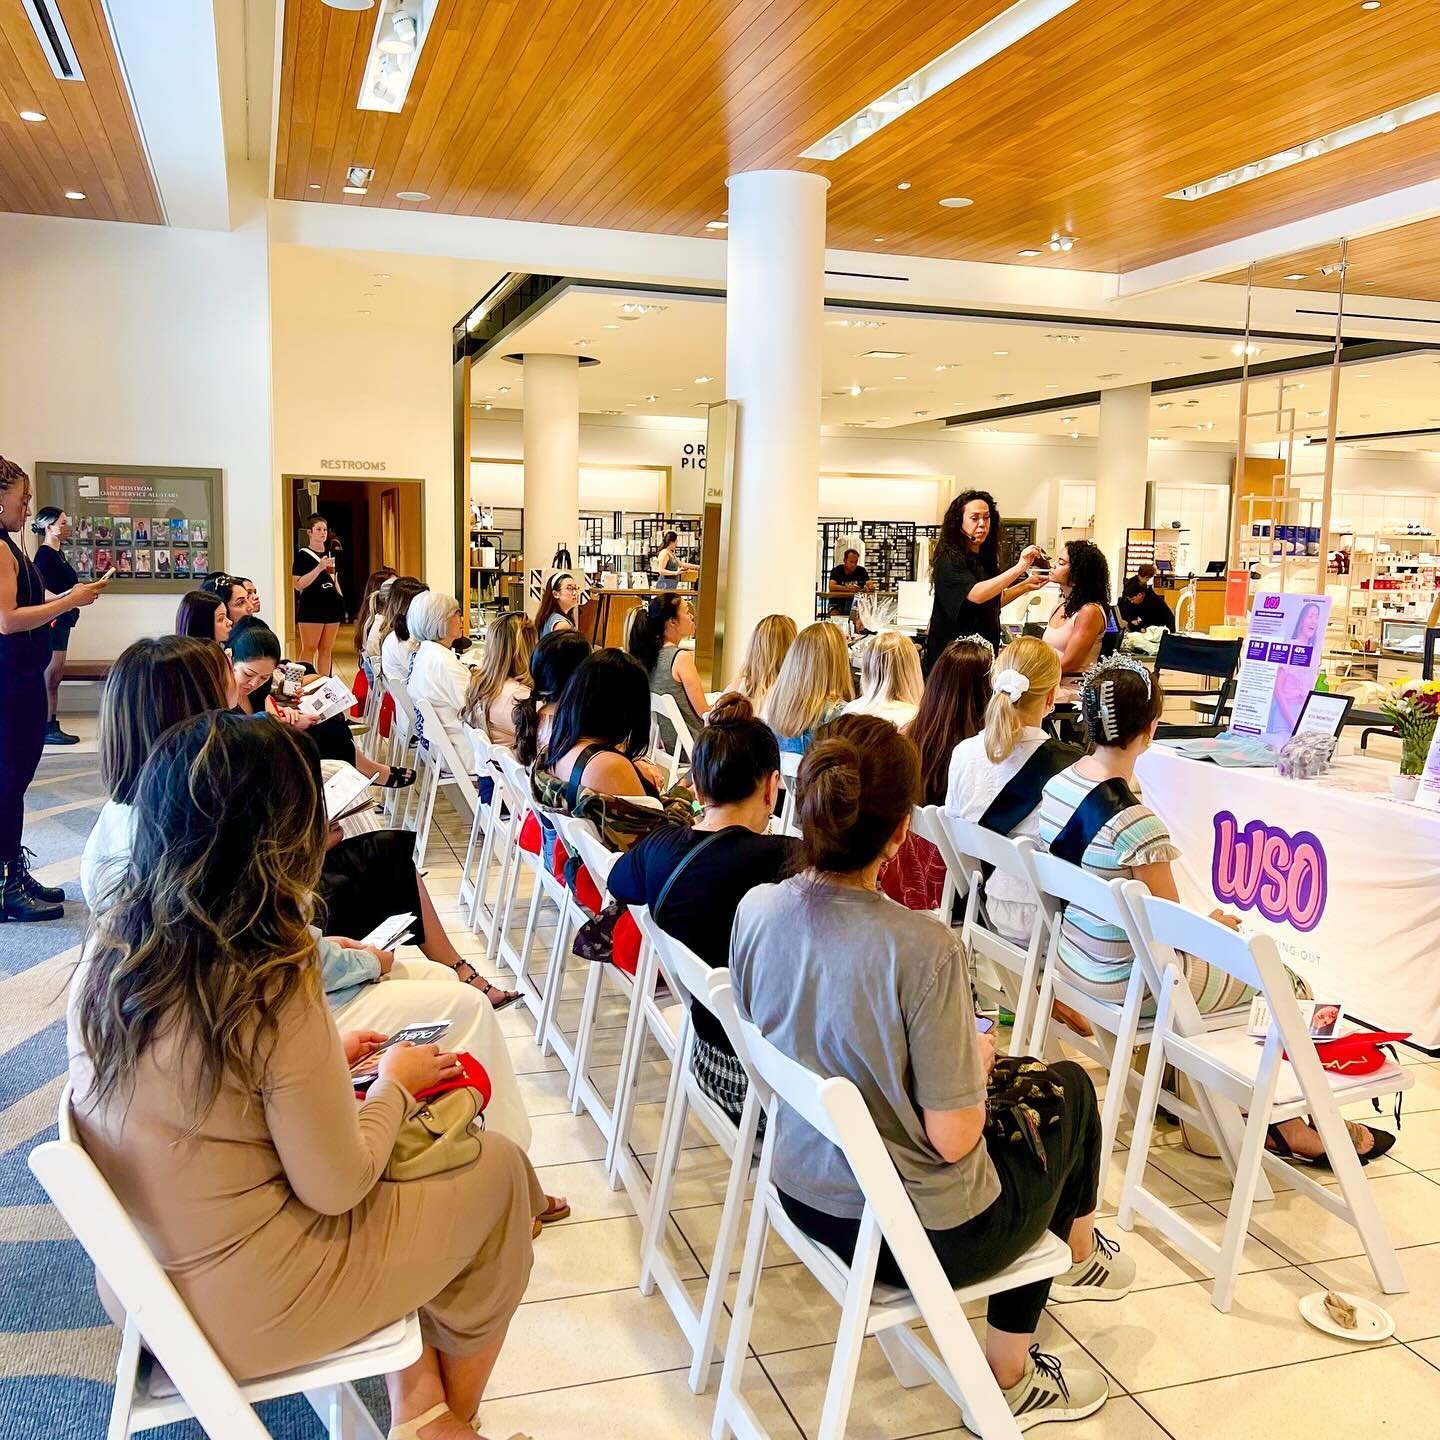 Mahalo to everyone who joined us yesterday at our beauty event with Nordstrom &amp; MAC! 💄 It was so wonderful seeing so many friends and supporters! We hope you enjoyed the event, swag, tasty bites, and amazing raffle prizes! 🌺💋 See you at the ne